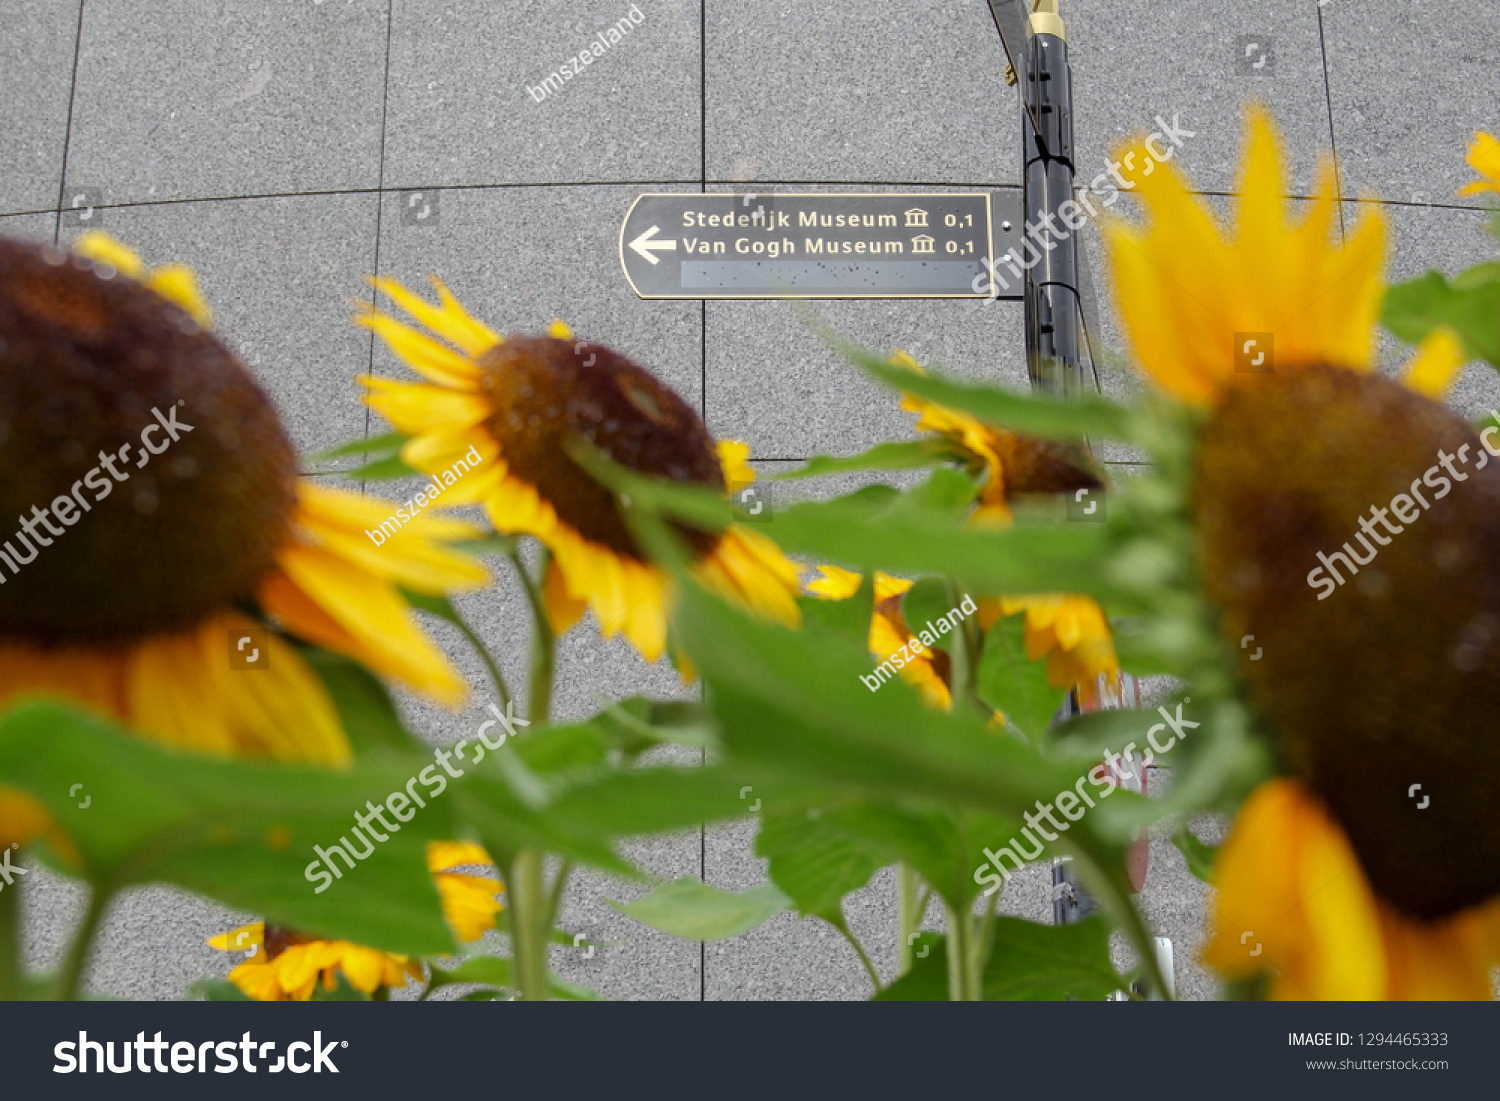 A sign pointing to the Van Gogh Museum and the Stedelijk Museum in Amsterdam, the Netherlands, through bright yellow sunflowers, which van Gogh made iconic in his paintings. #1294465333